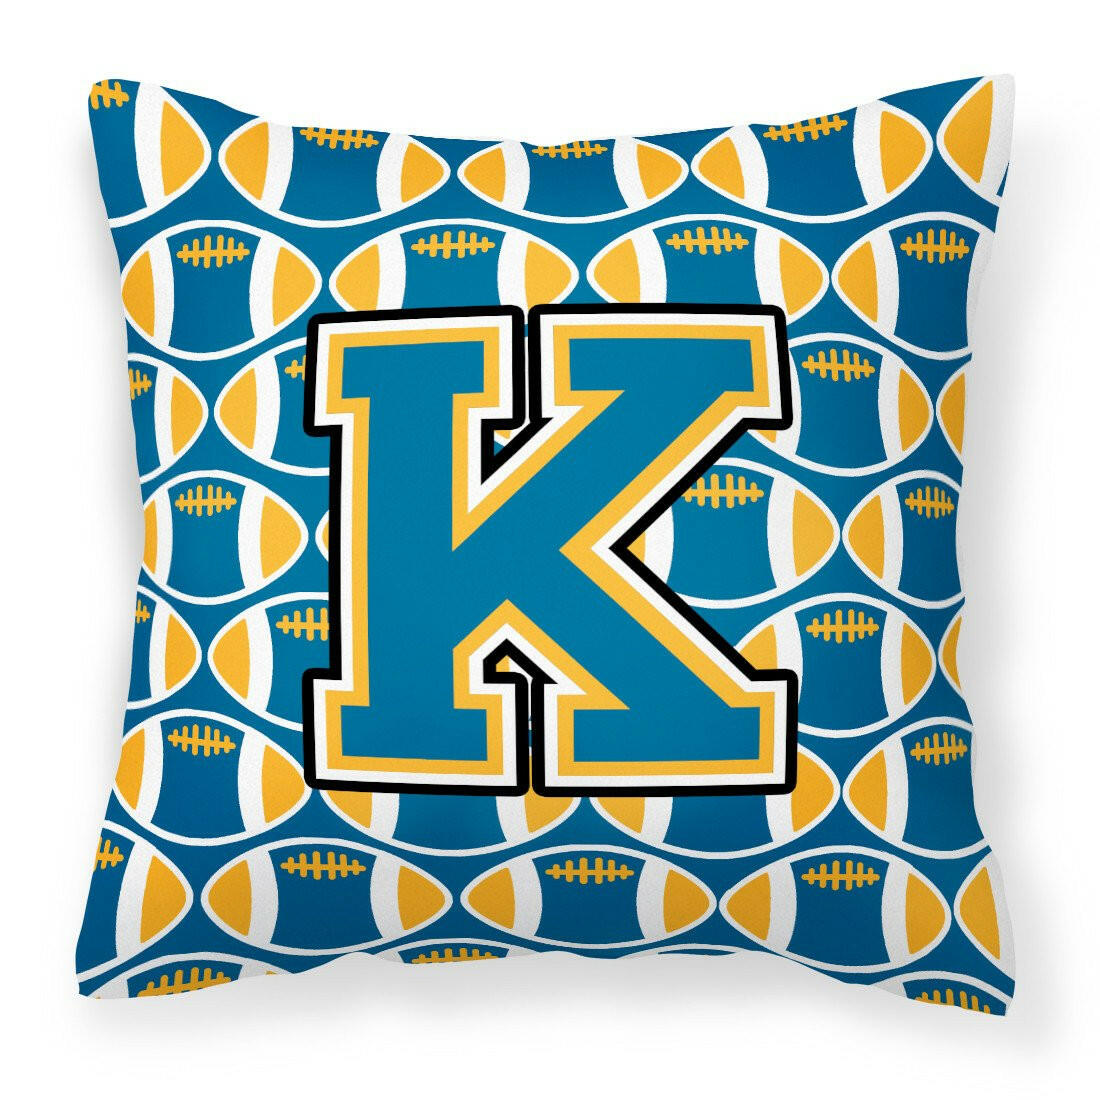 Letter K Football Blue and Gold Fabric Decorative Pillow CJ1077-KPW1414 by Caroline's Treasures